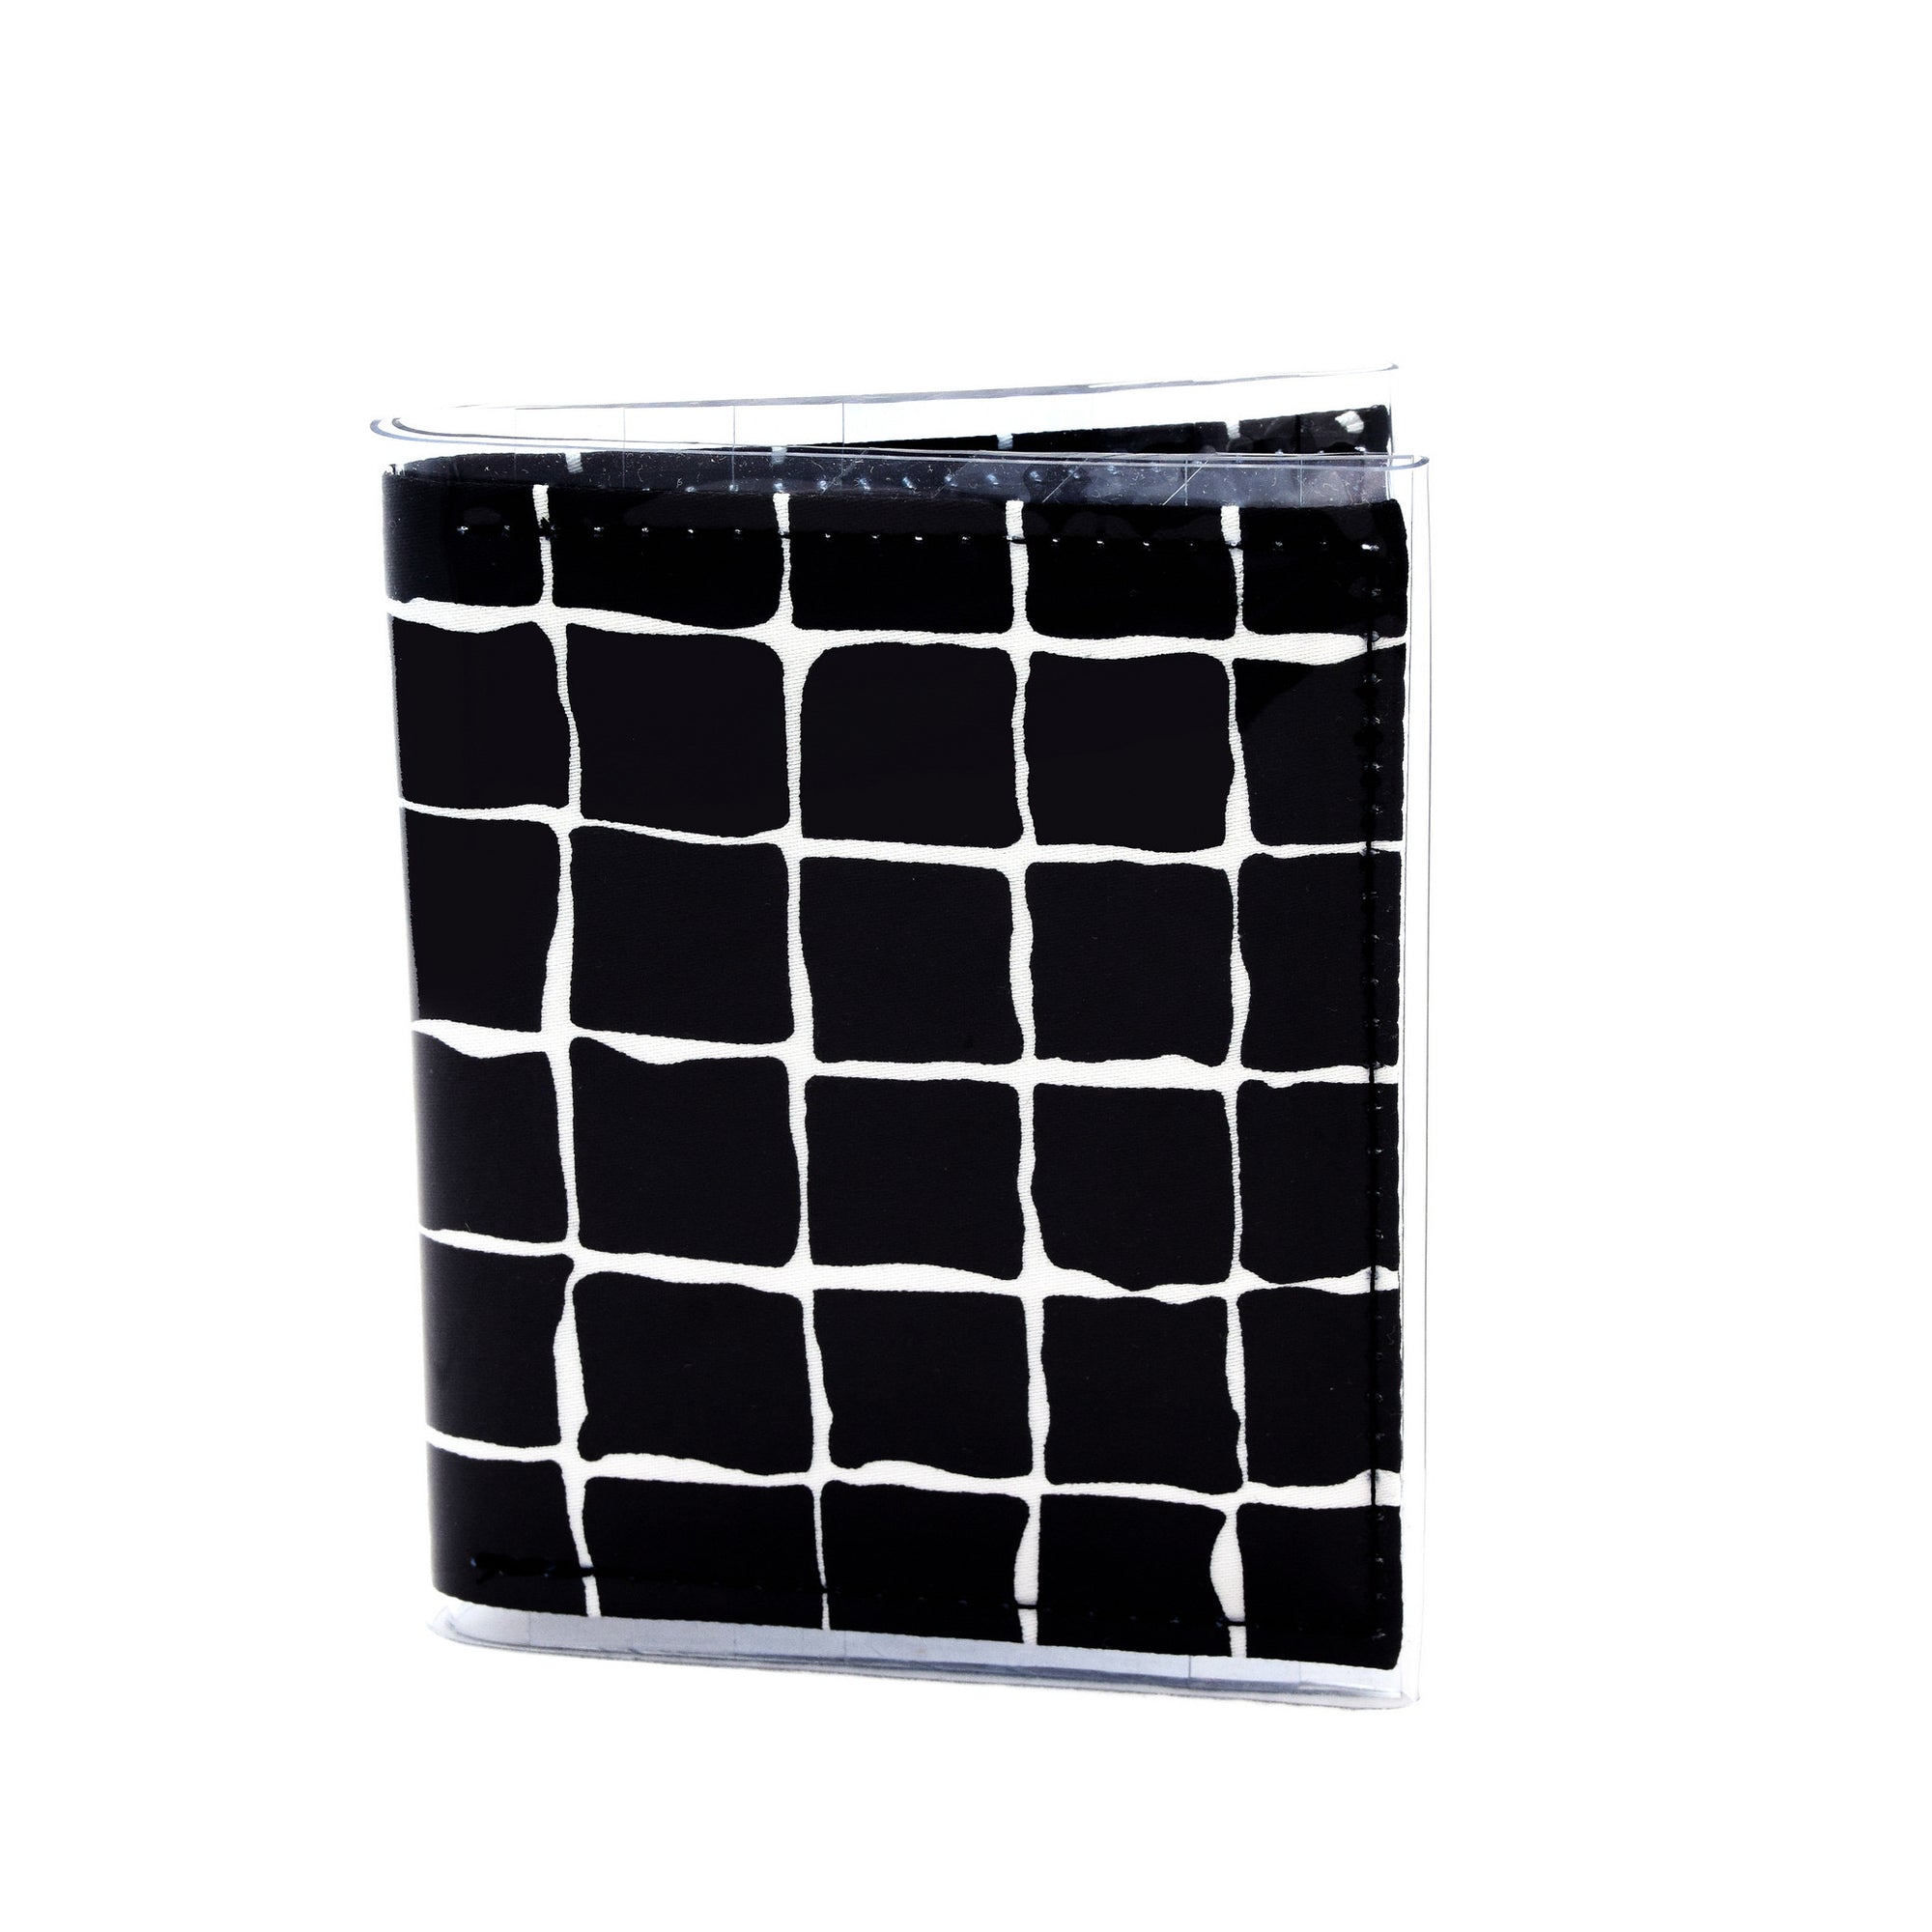 Warrior Wallet - Black and white grid cotton sateen fabric